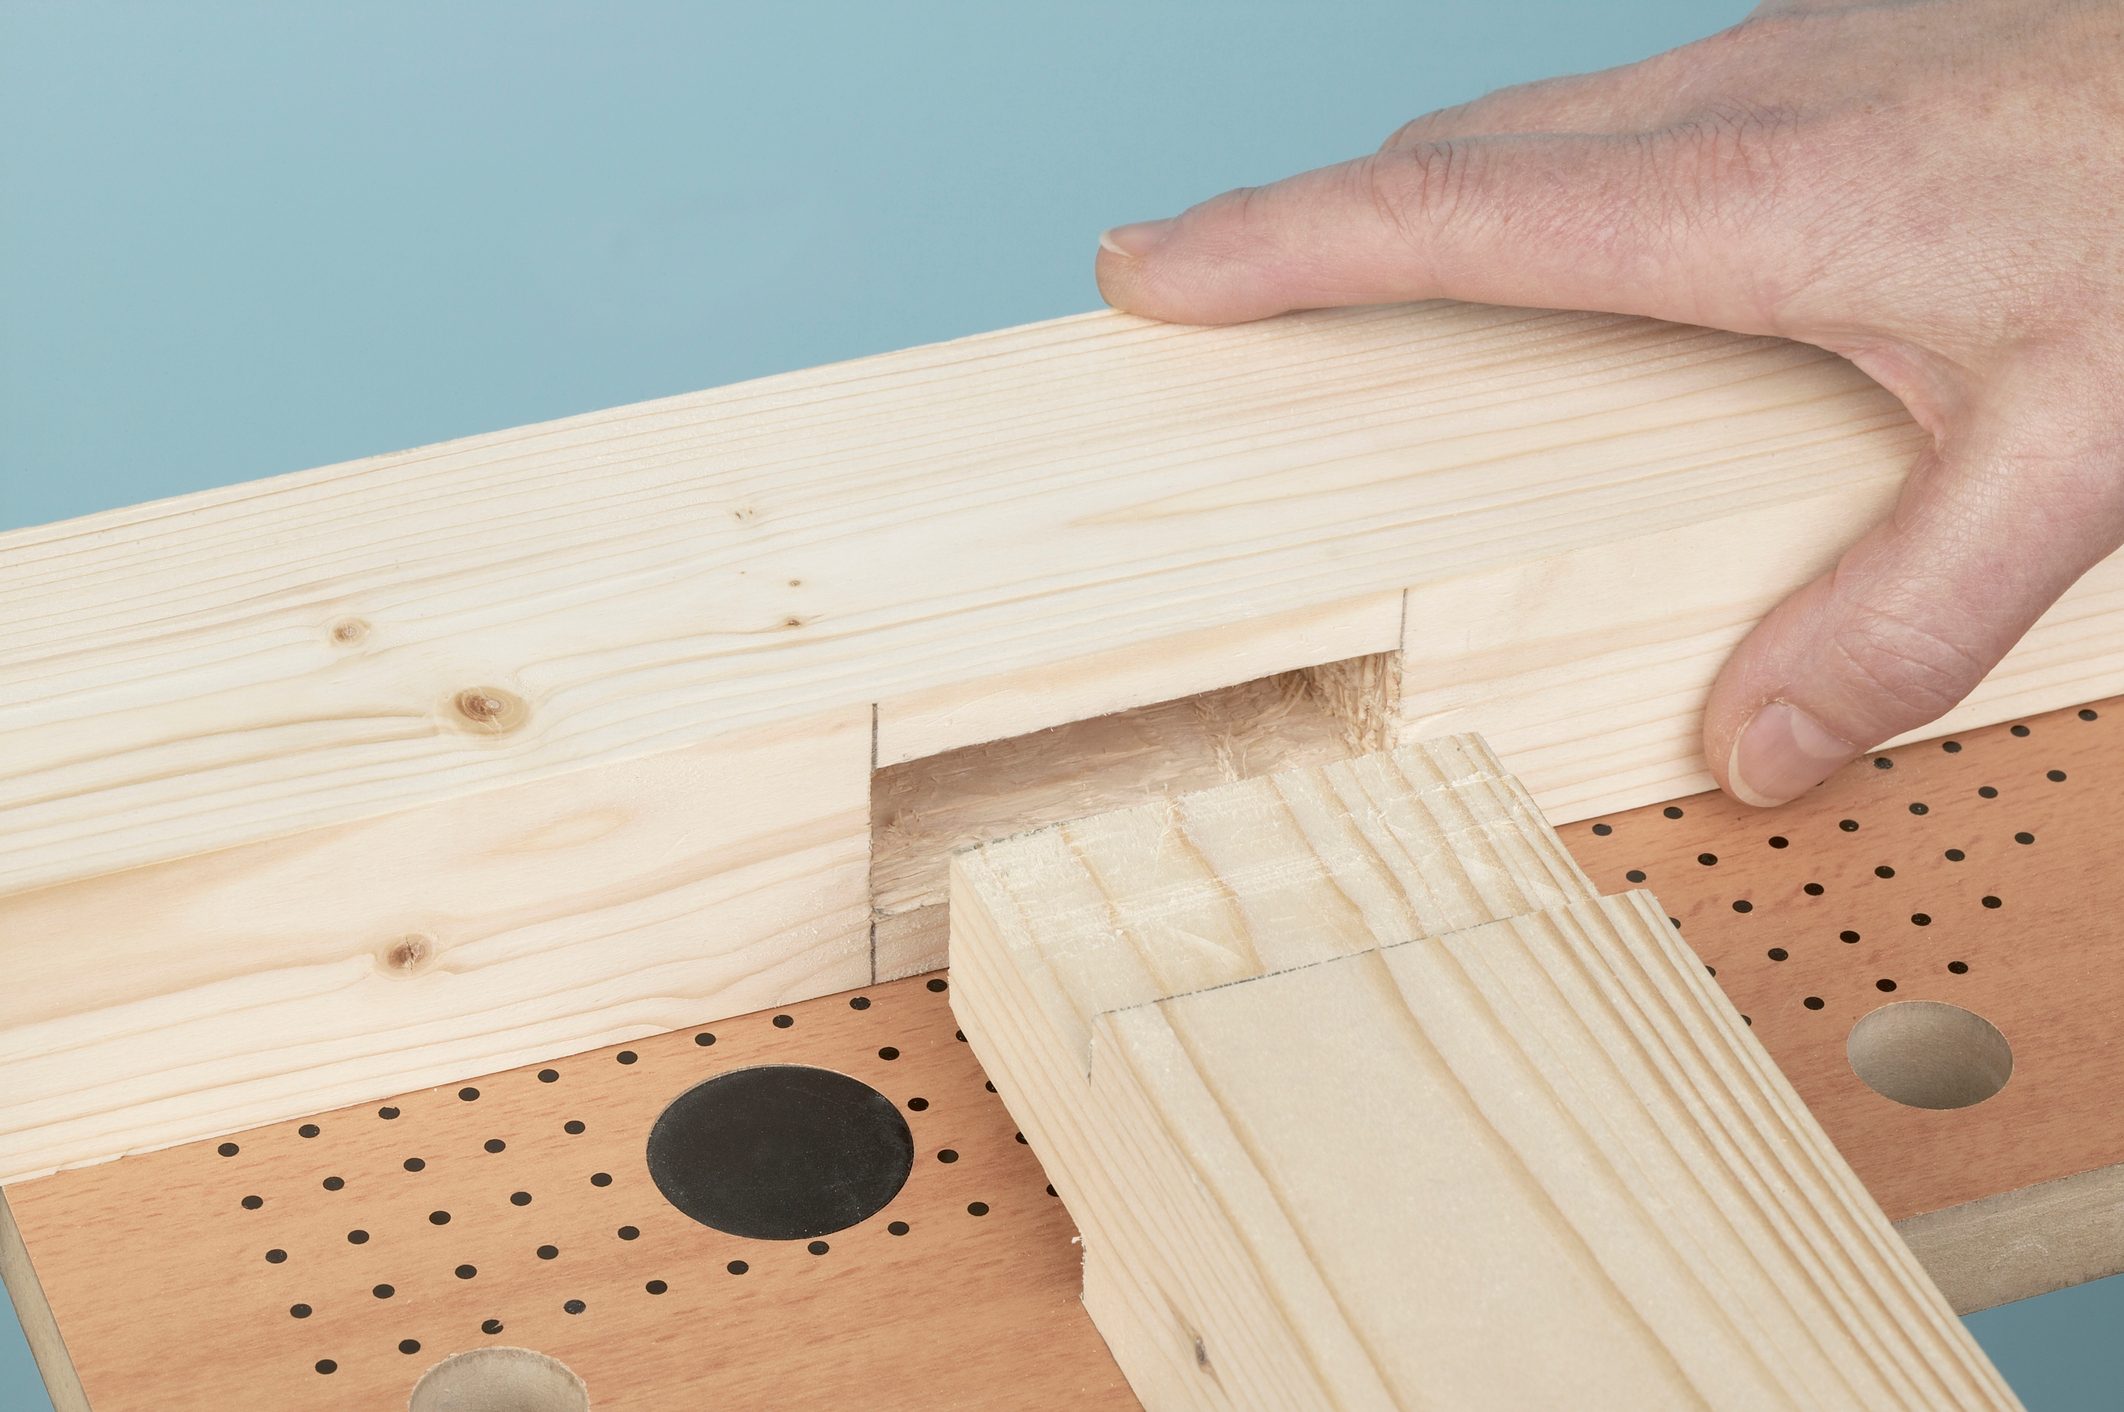 Person joining together a mortise and tenon joint